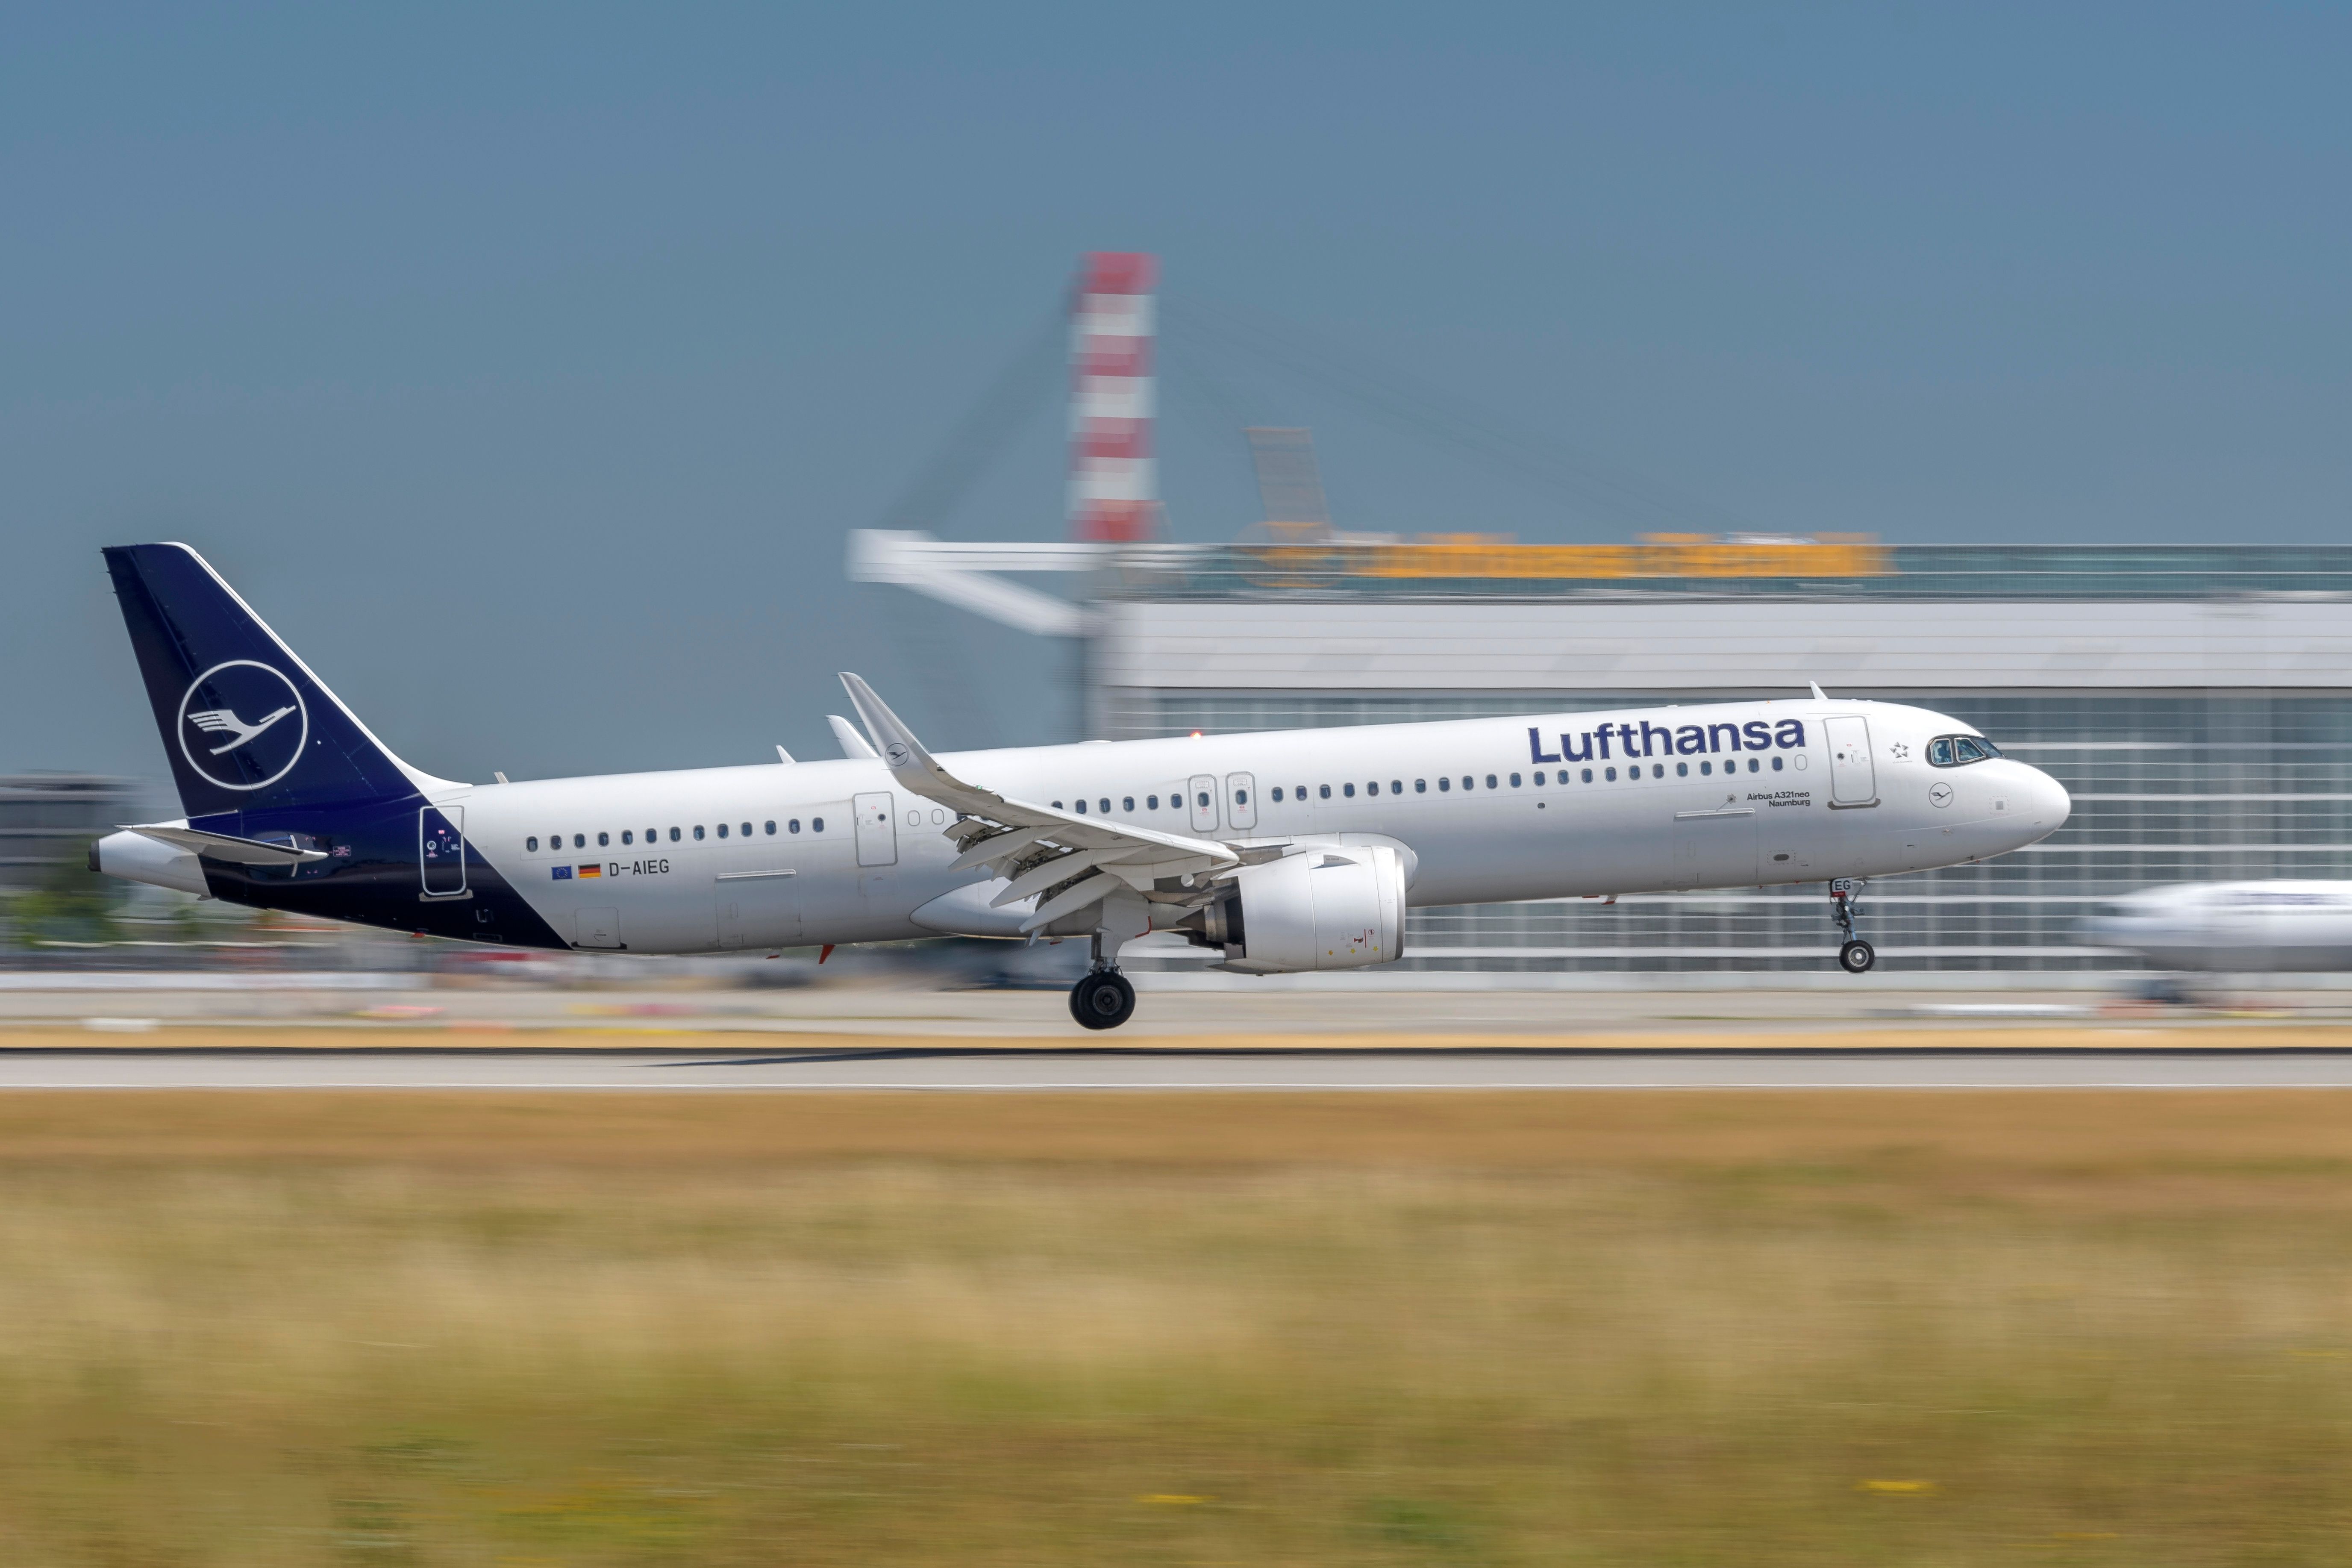 A Lufthansa A321neo just as it takes off.